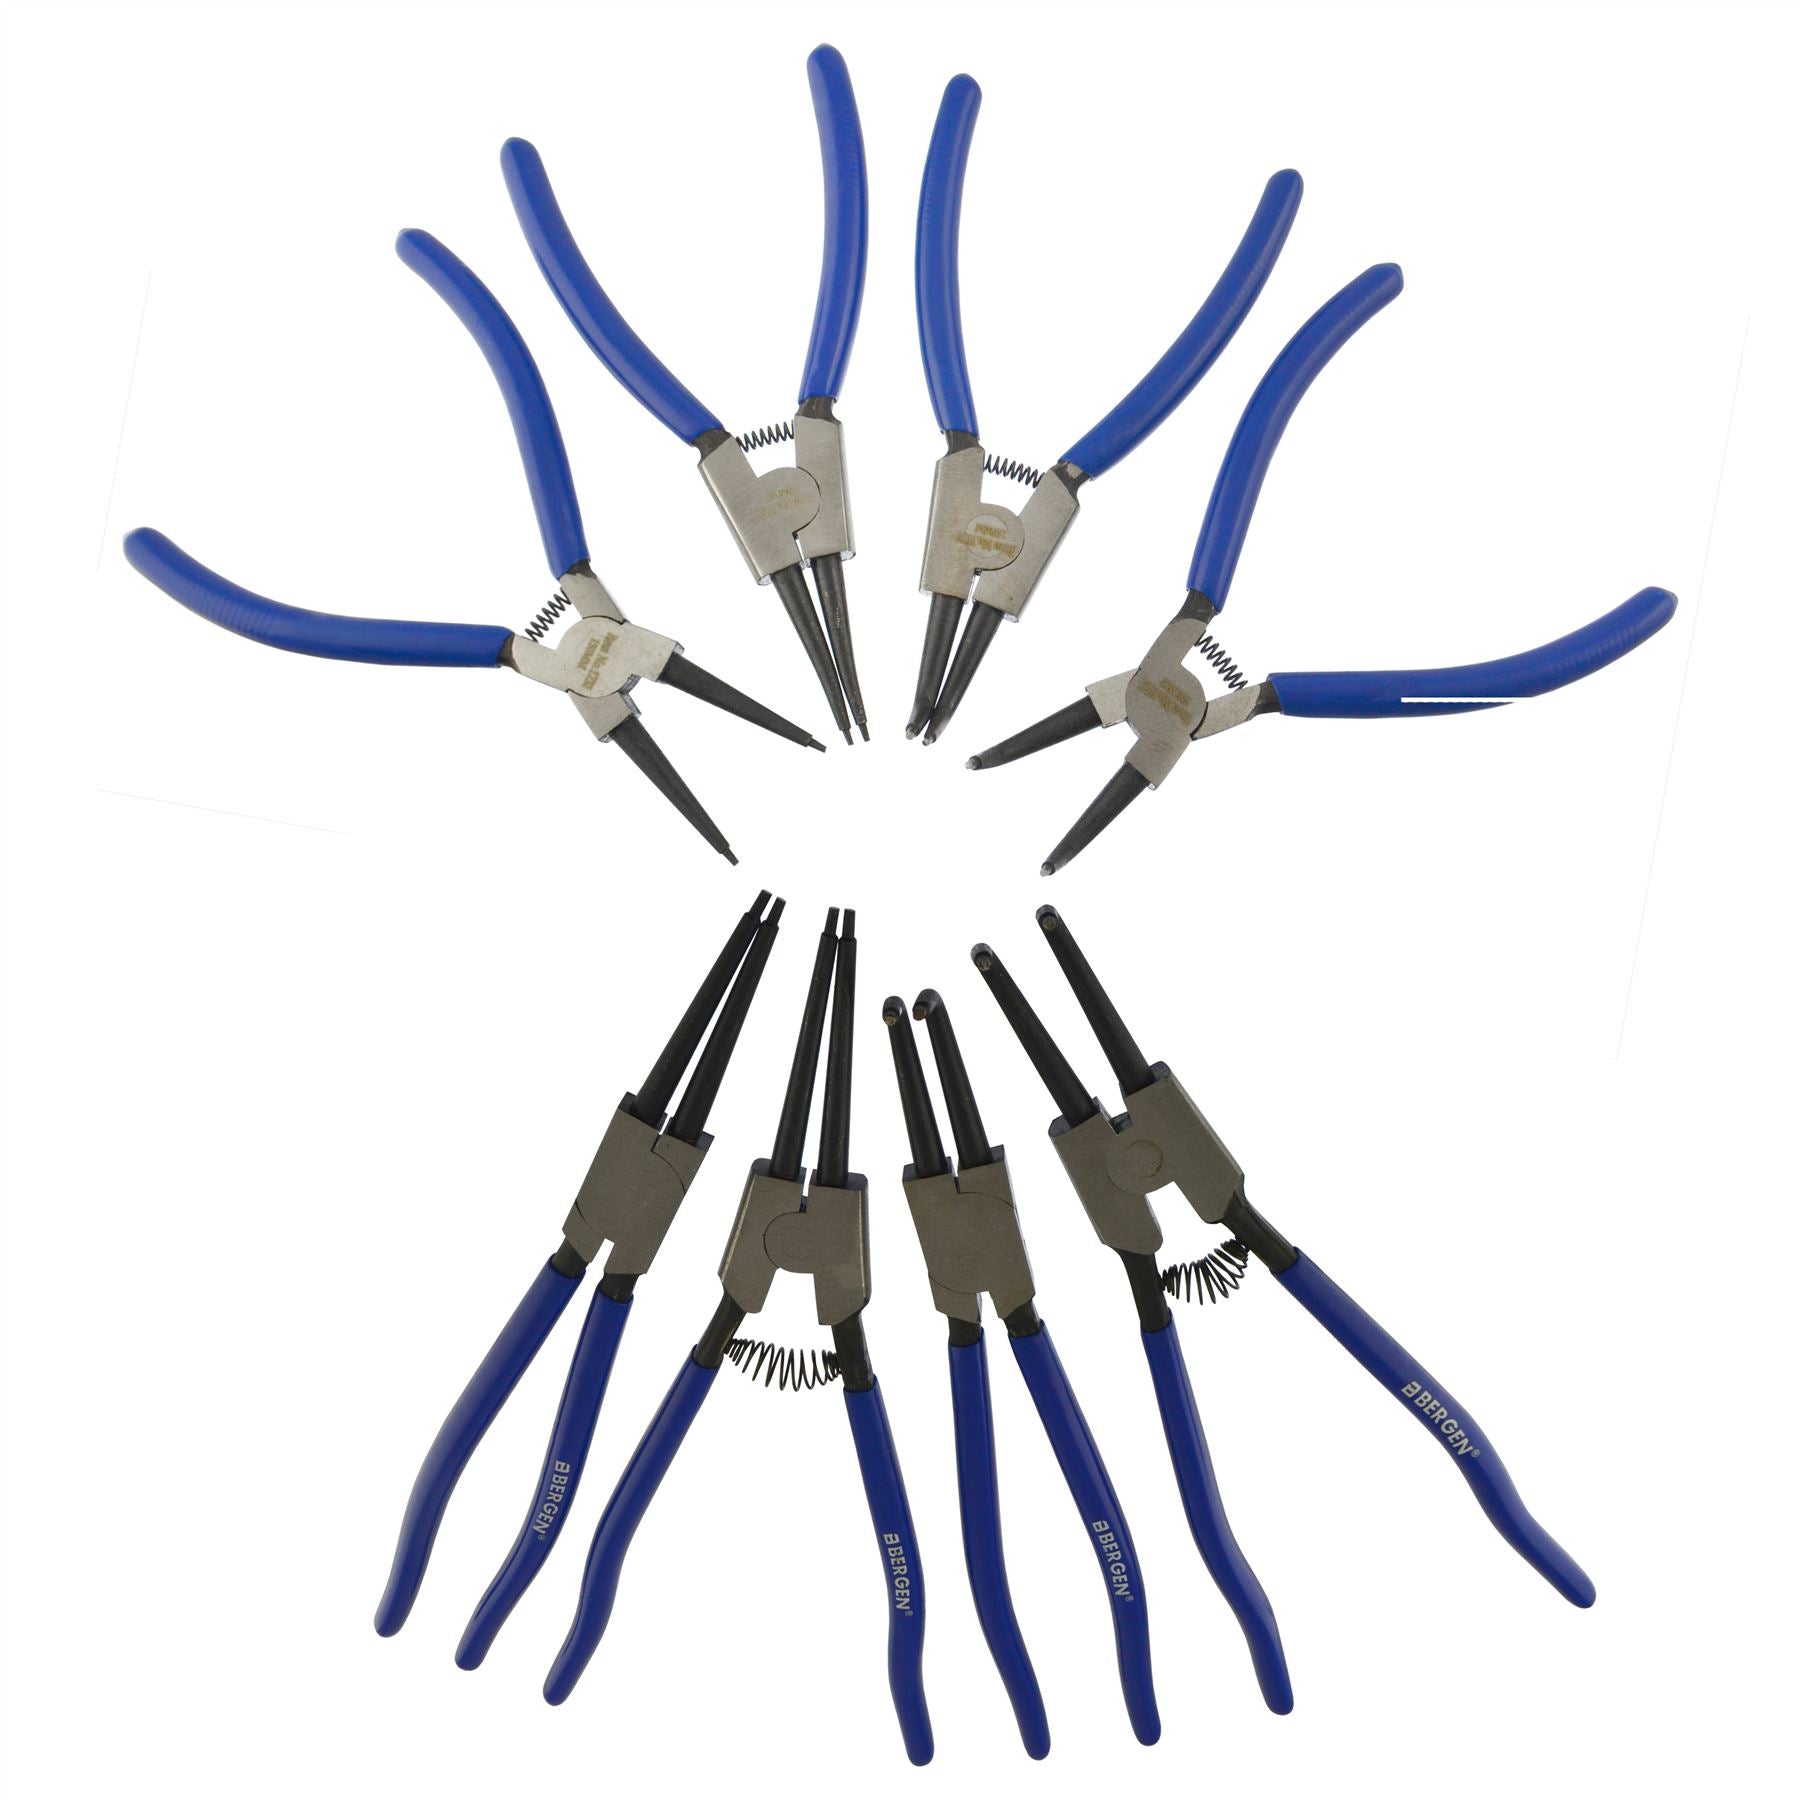 6" And 12" Circlip Plier Pliers Sets Internal and External / Bent and Straight